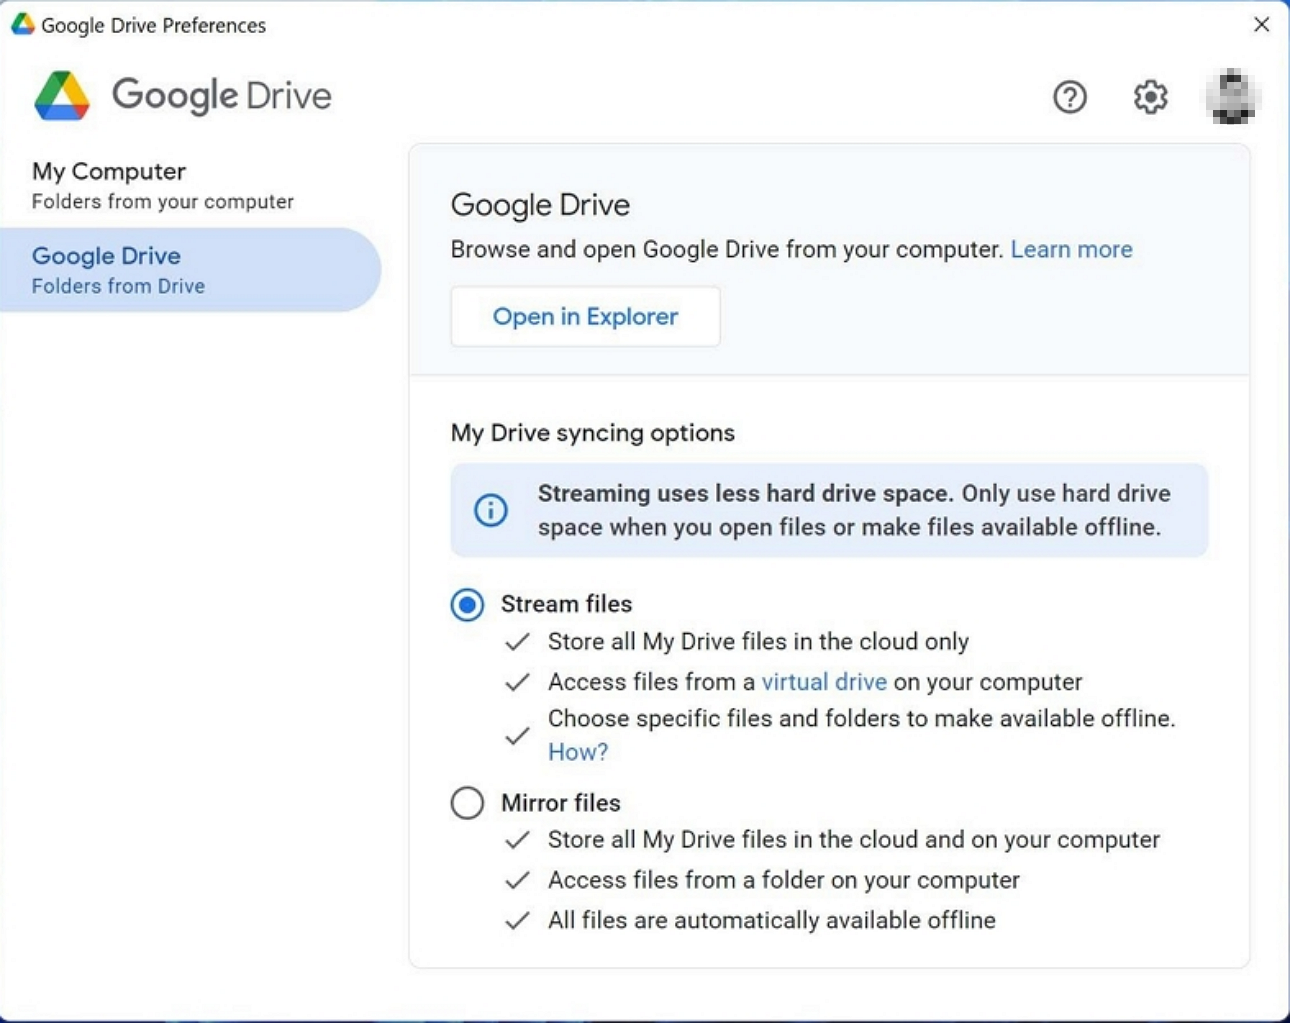 How do I open my Backup files on Google Drive?